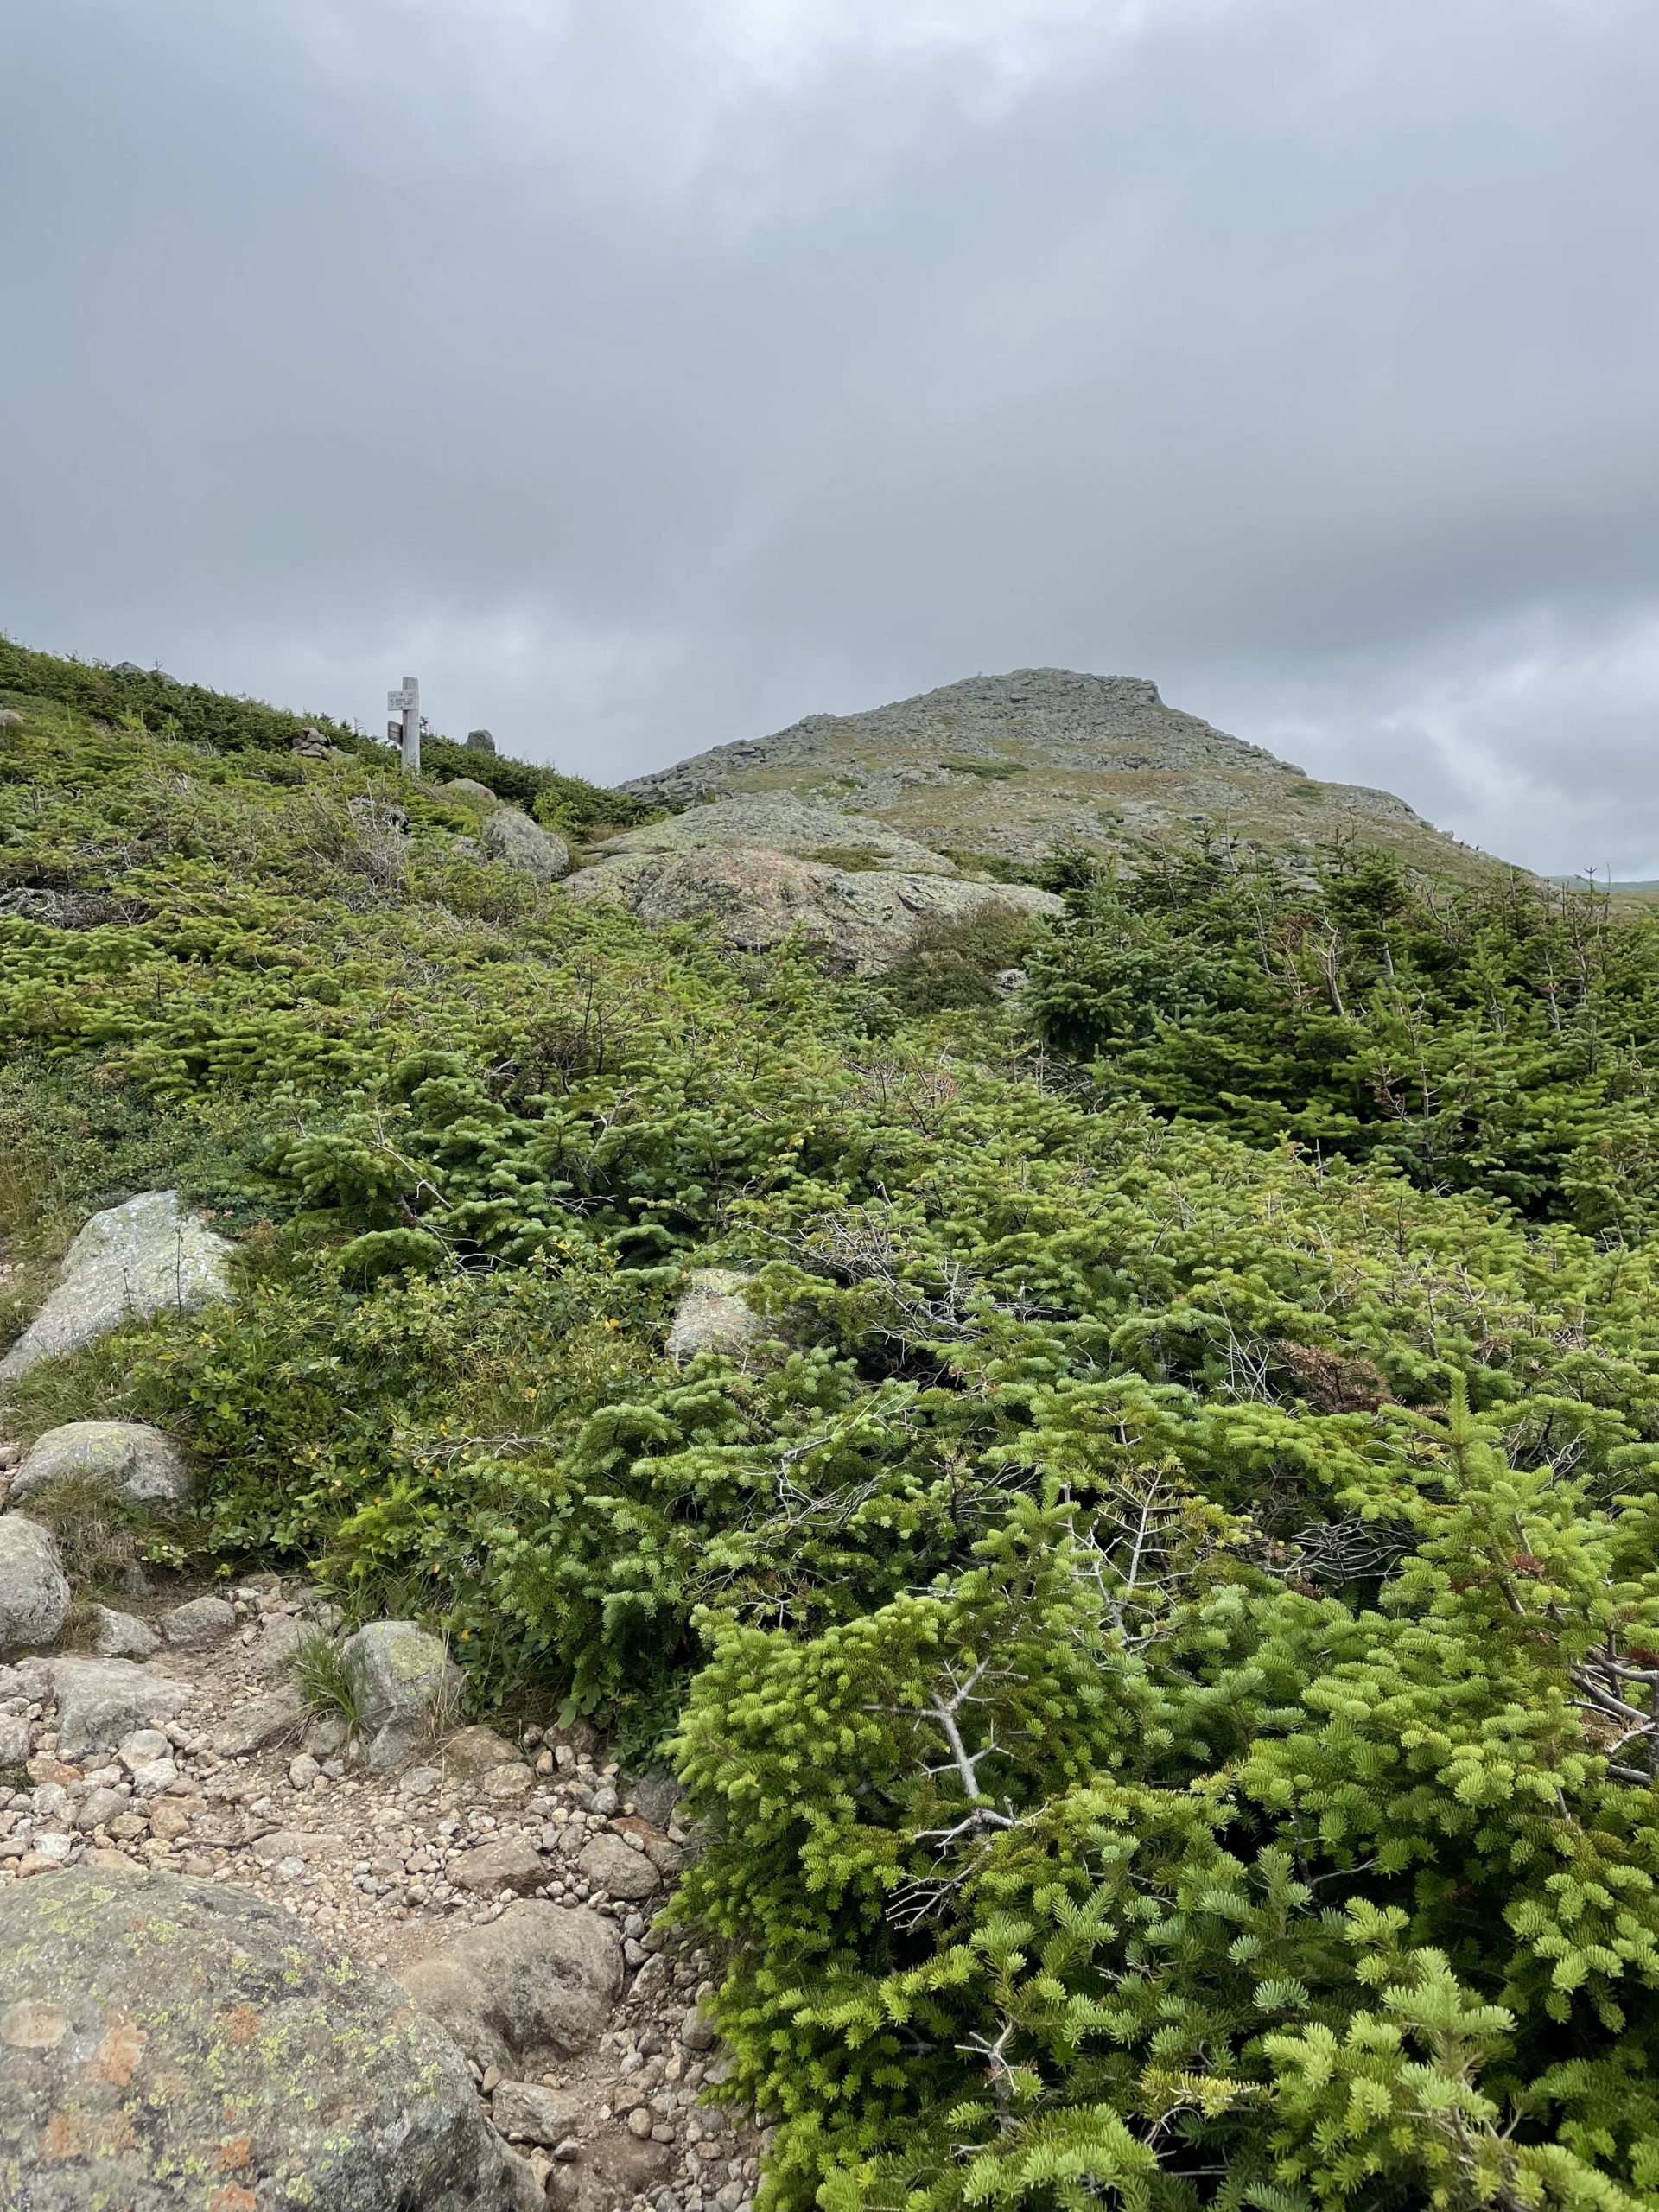 Crawford Path, seen while hiking Mt. Pierce and Mt. Jackson in the White Mountains National Forest, New Hampshire